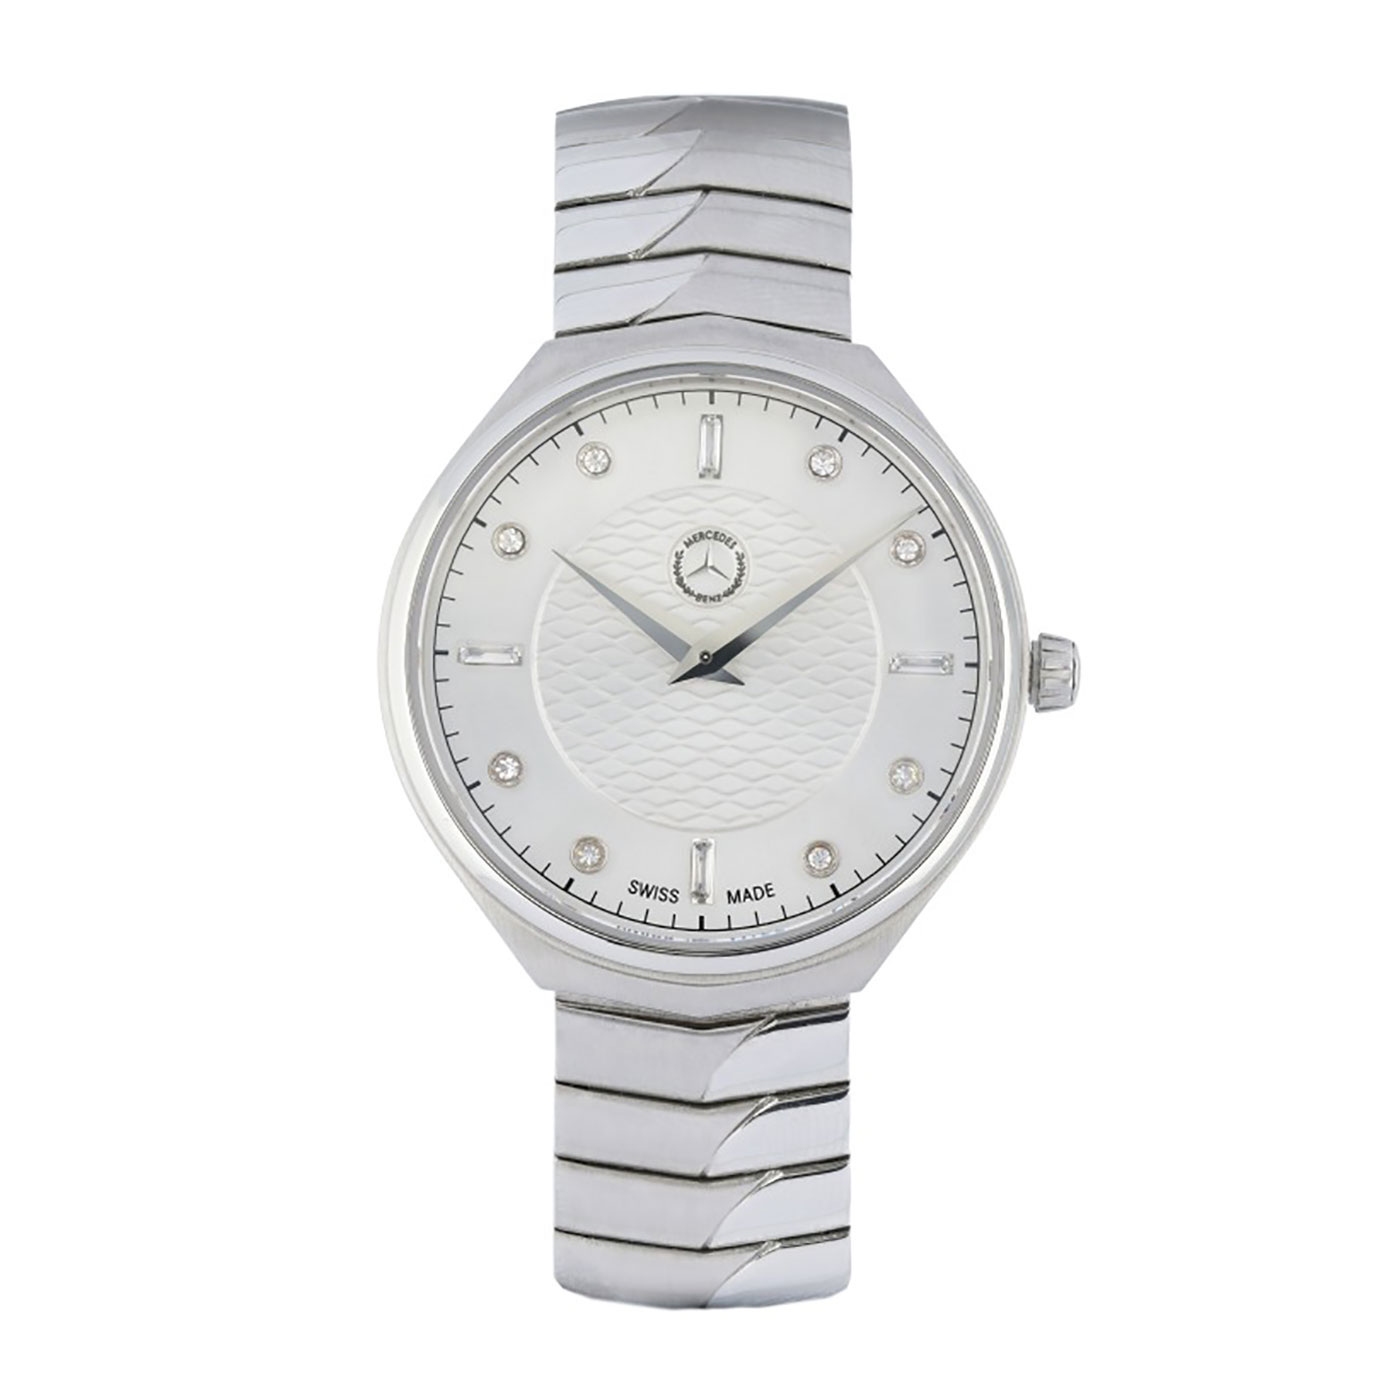 Mercedes Benz Original Ladies Watch Stainless Steel Classic Lady